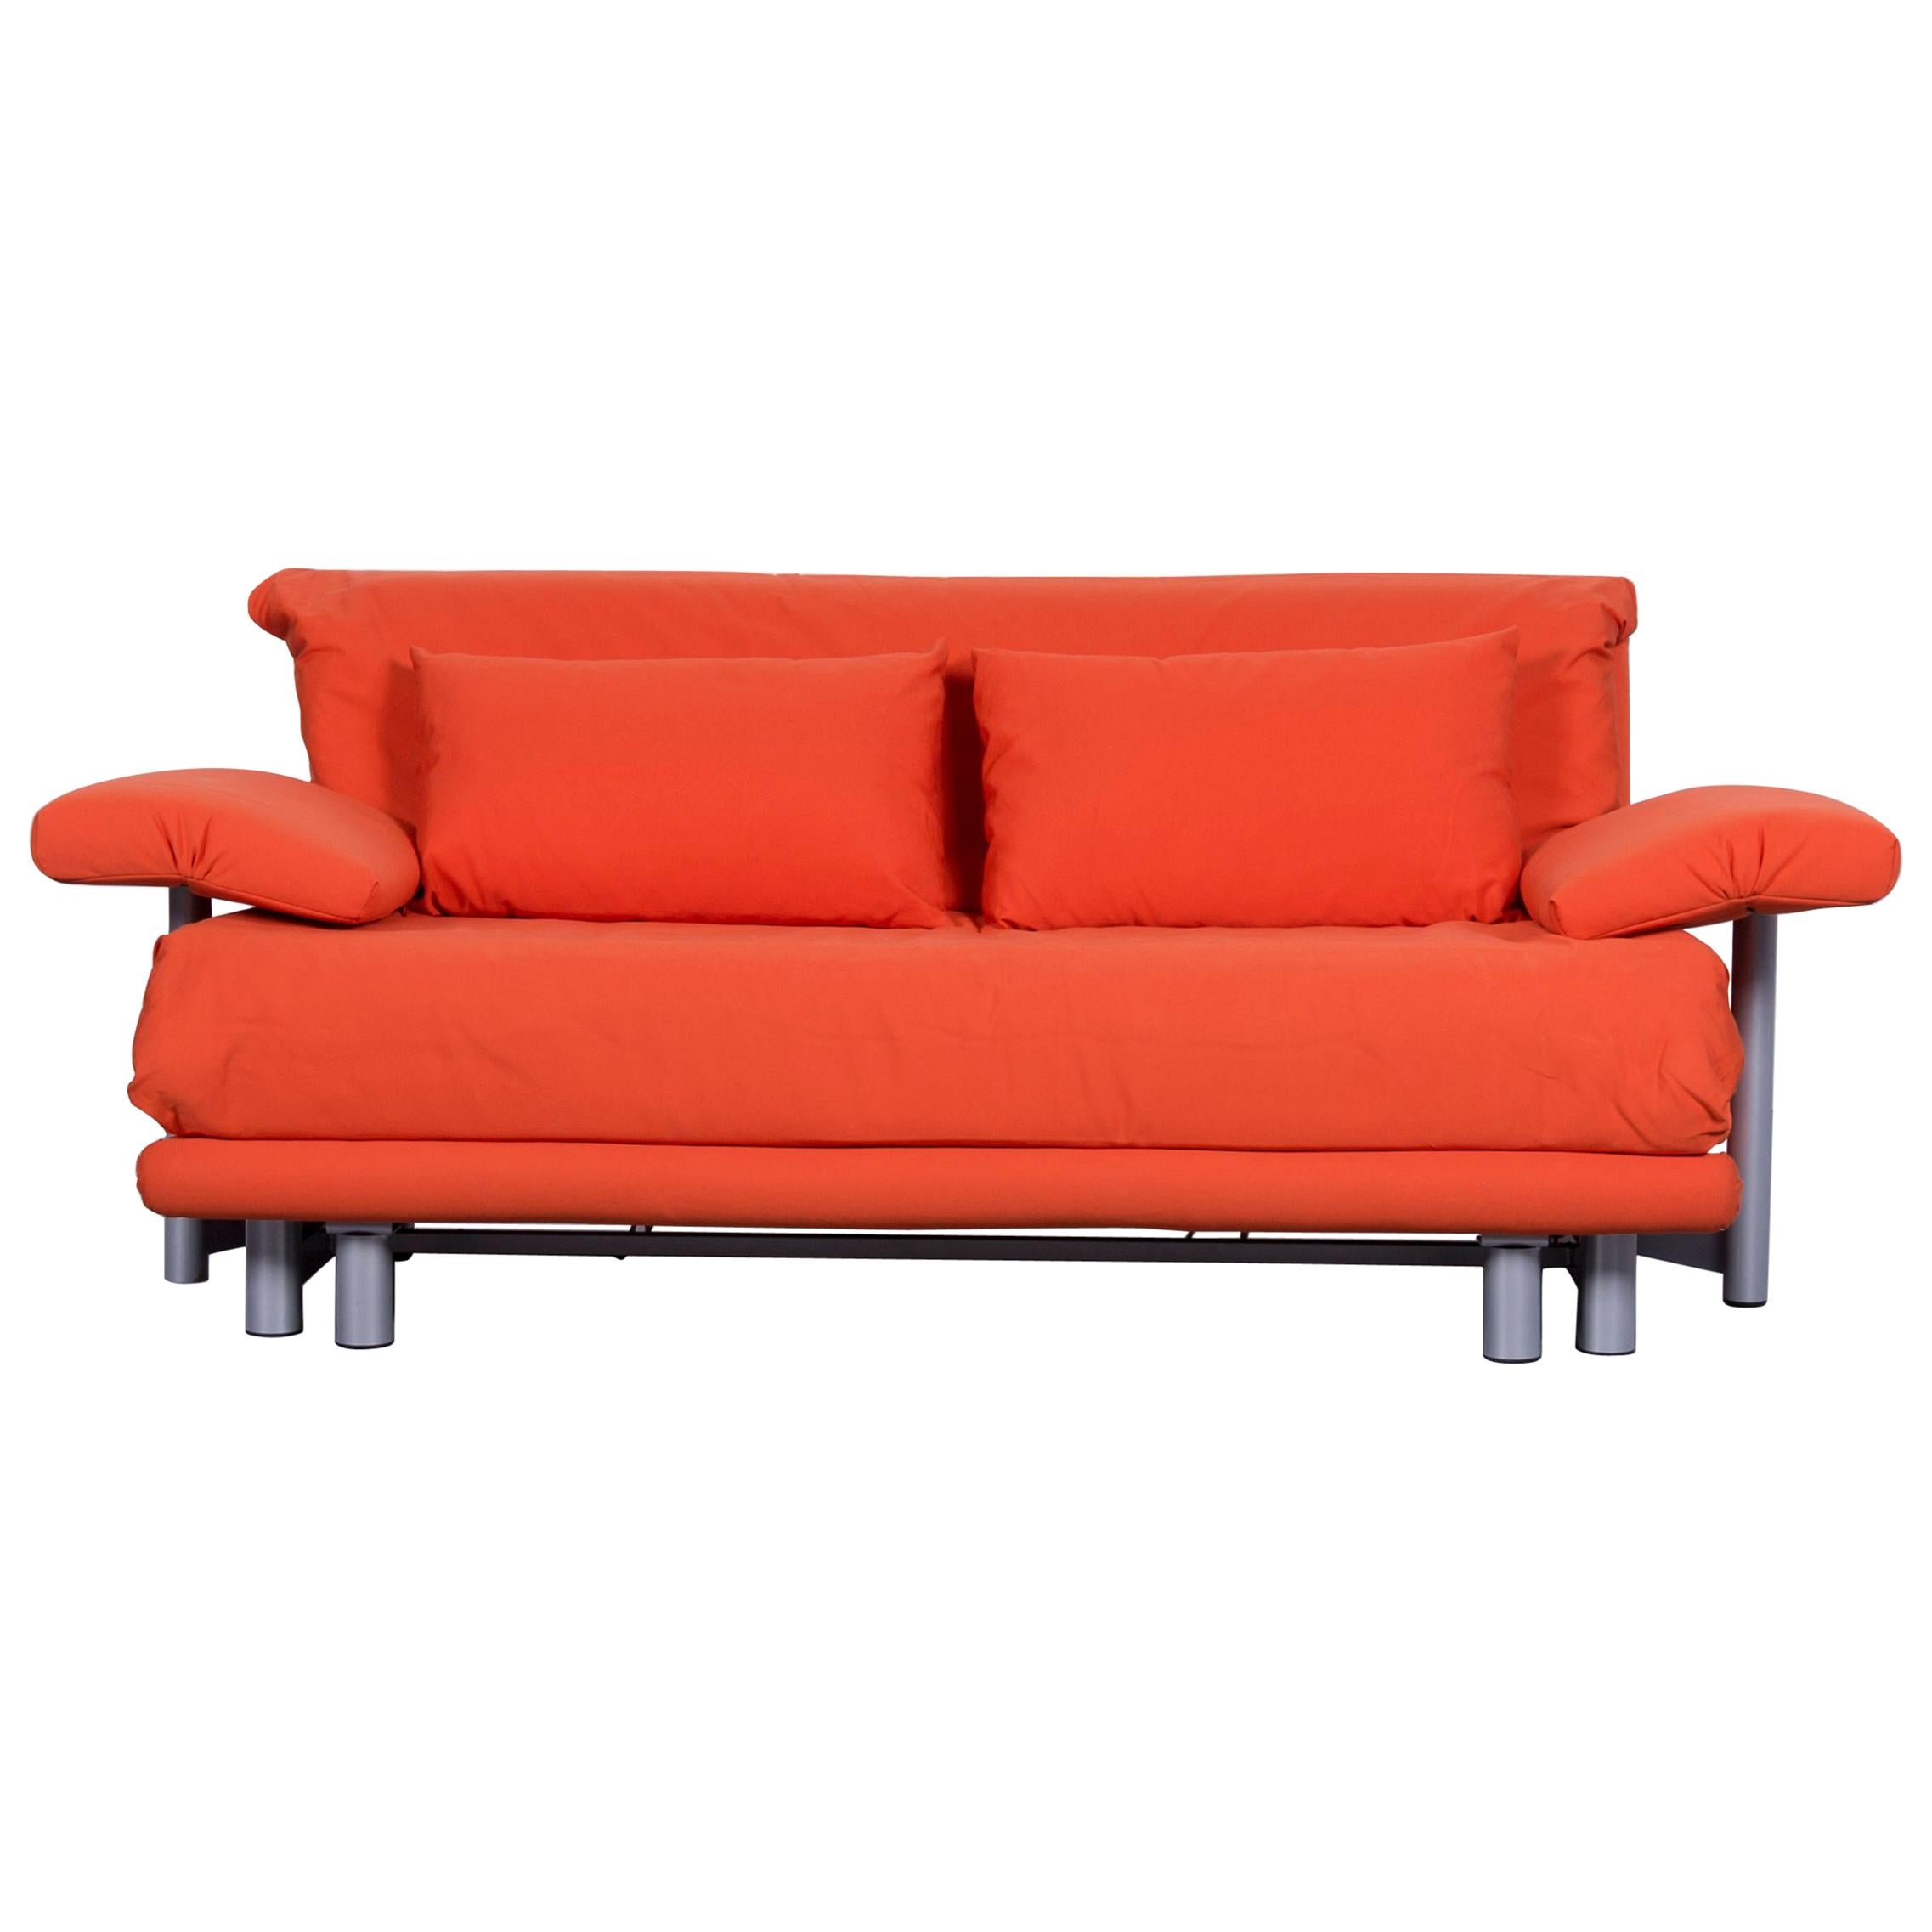 Ligne Roset Multy Fabric Sofa-Bed Orange Two-Seat Couch Sleep Function